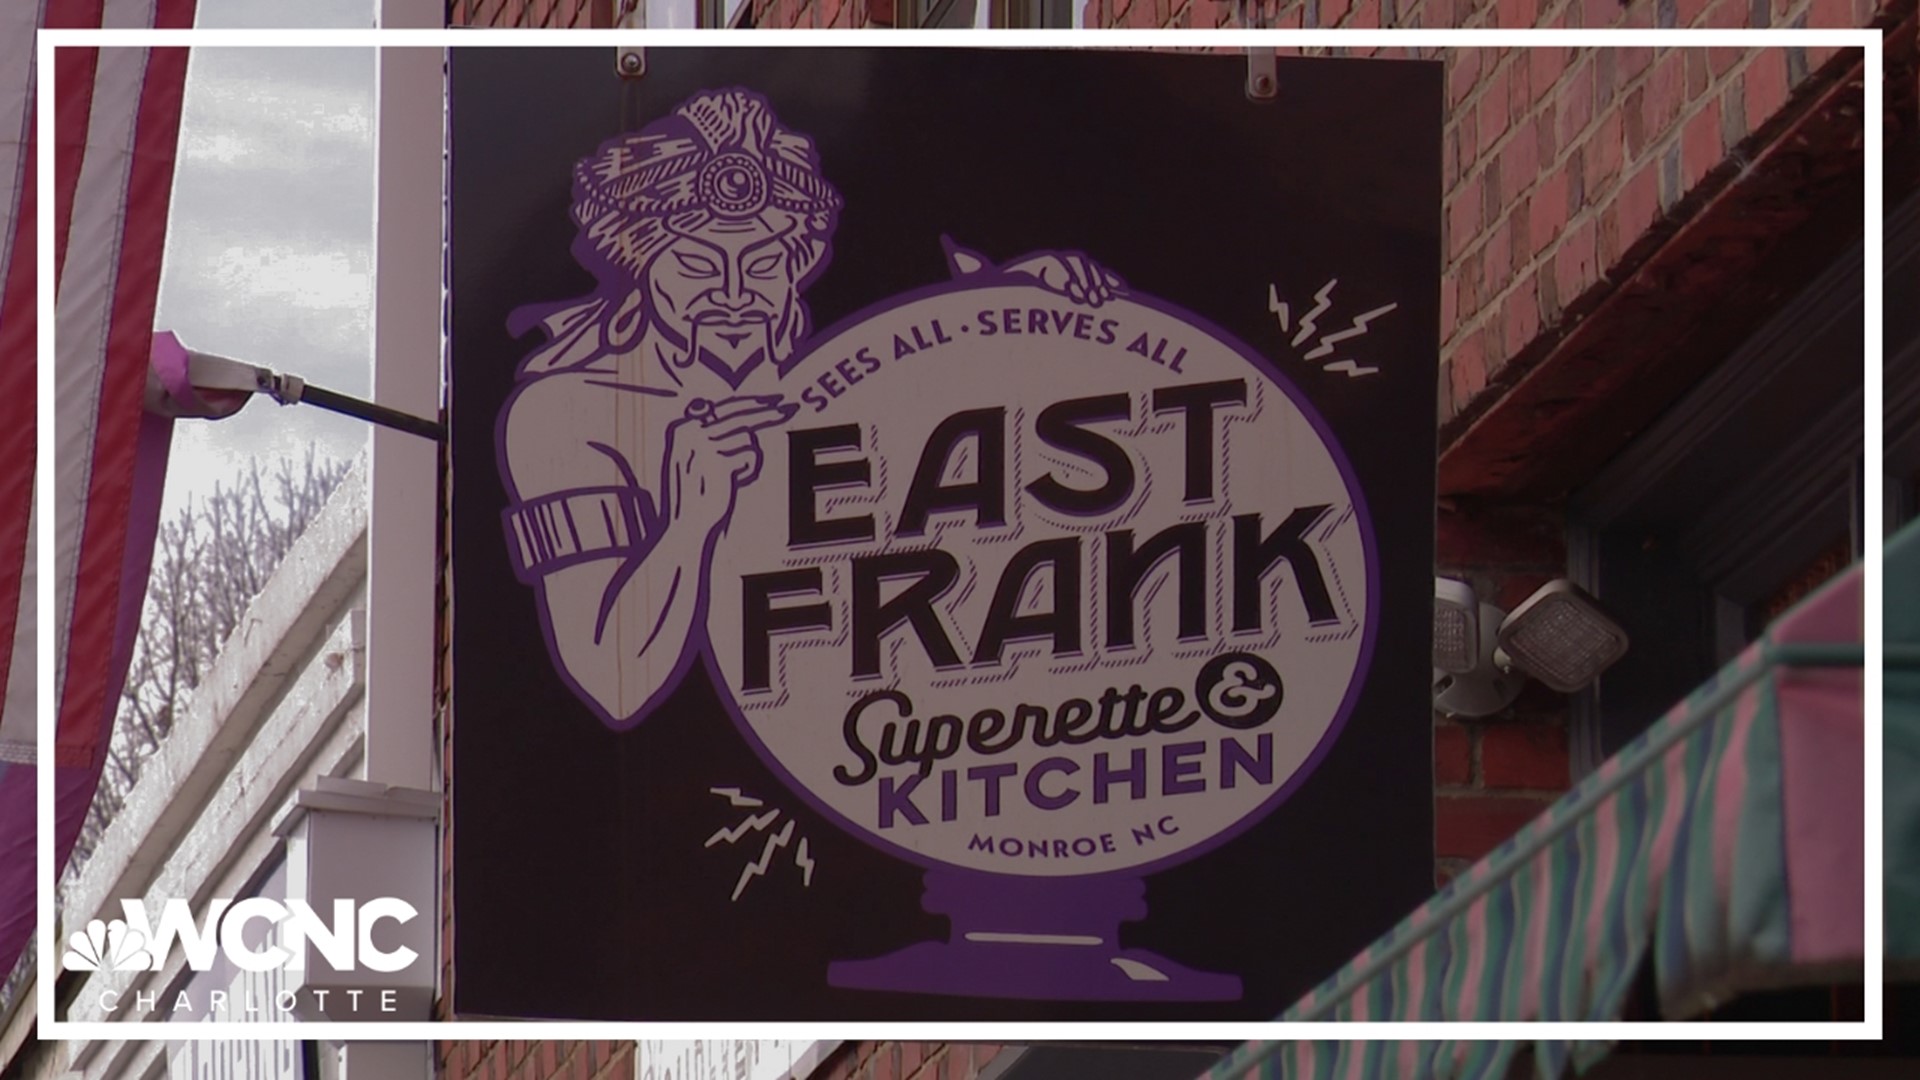 The attorney representing the plaintiffs said the suit claims East Frank Superette and Kitchen took photos of protesters and used them as advertisements.